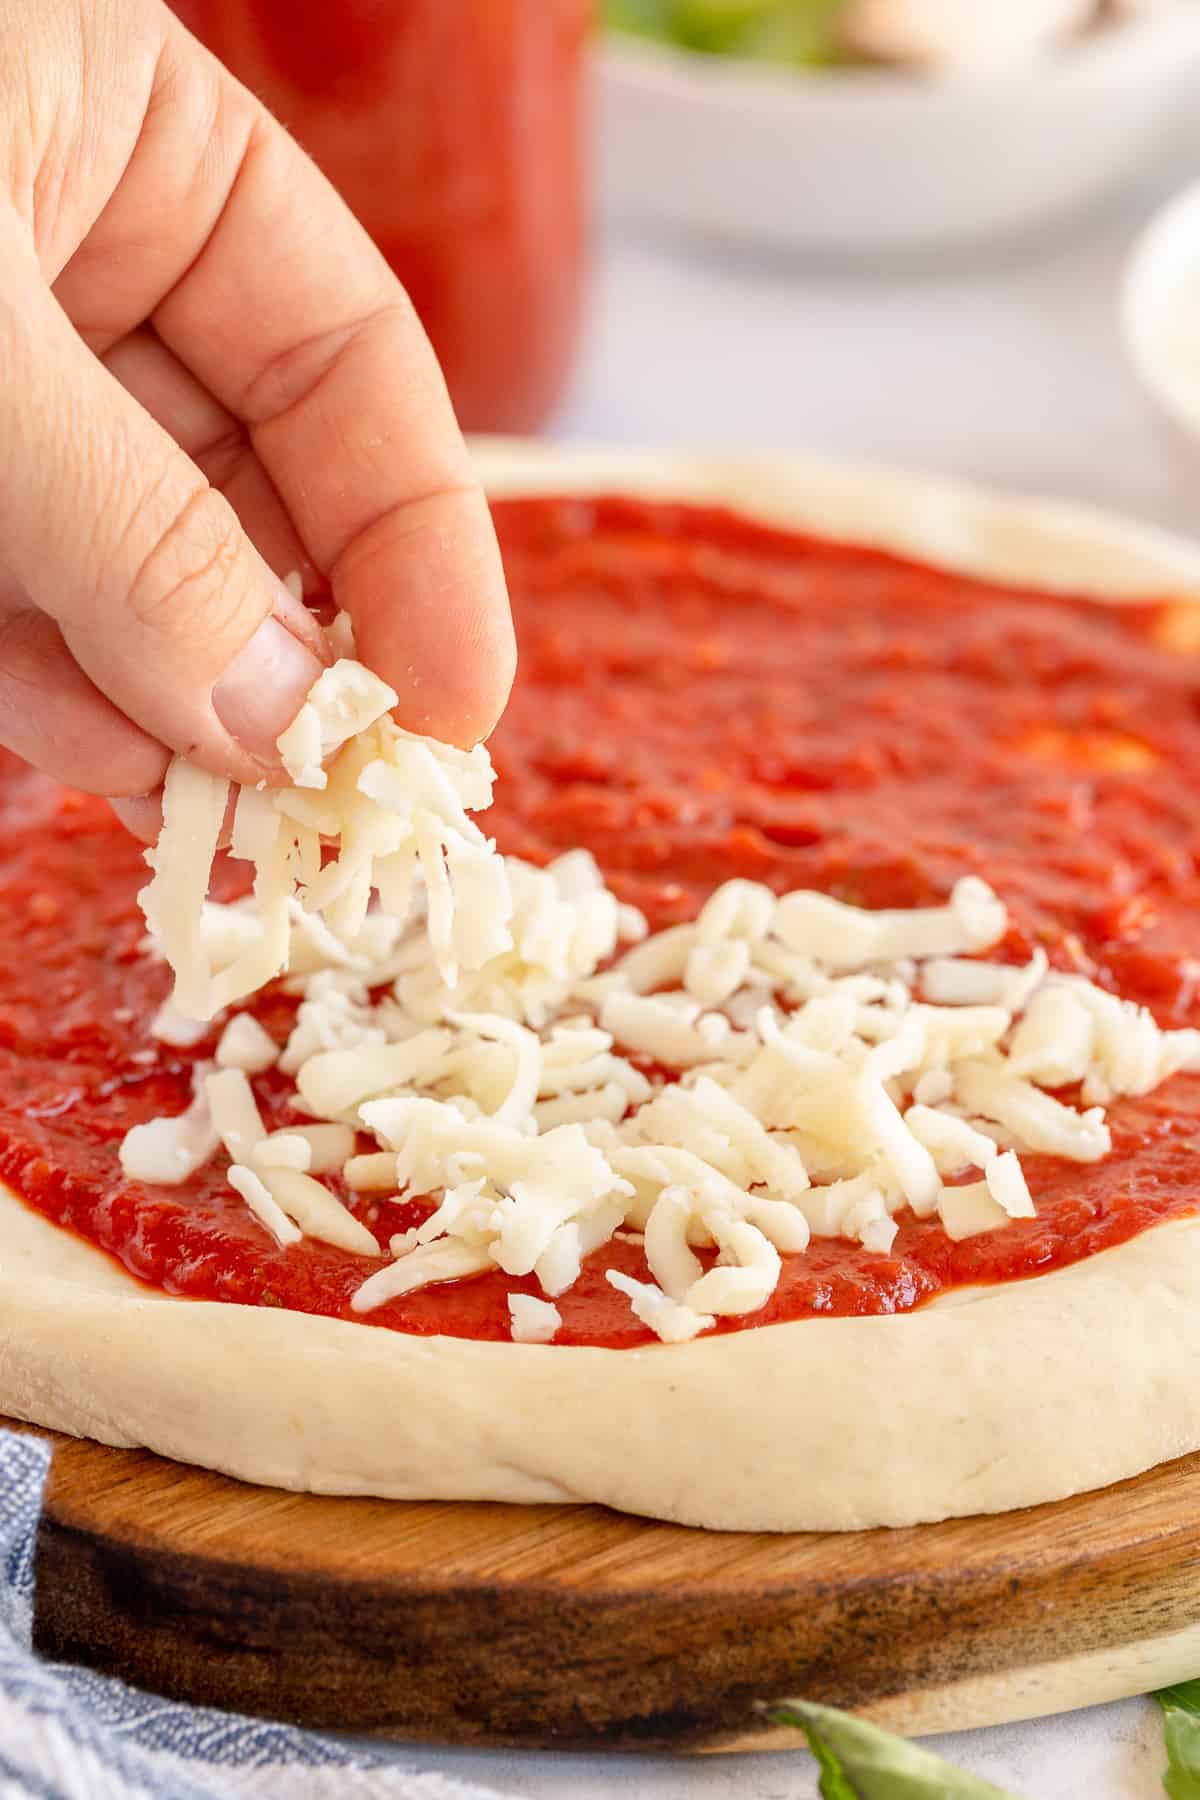 A hand sprinkling cheese on a pizza.